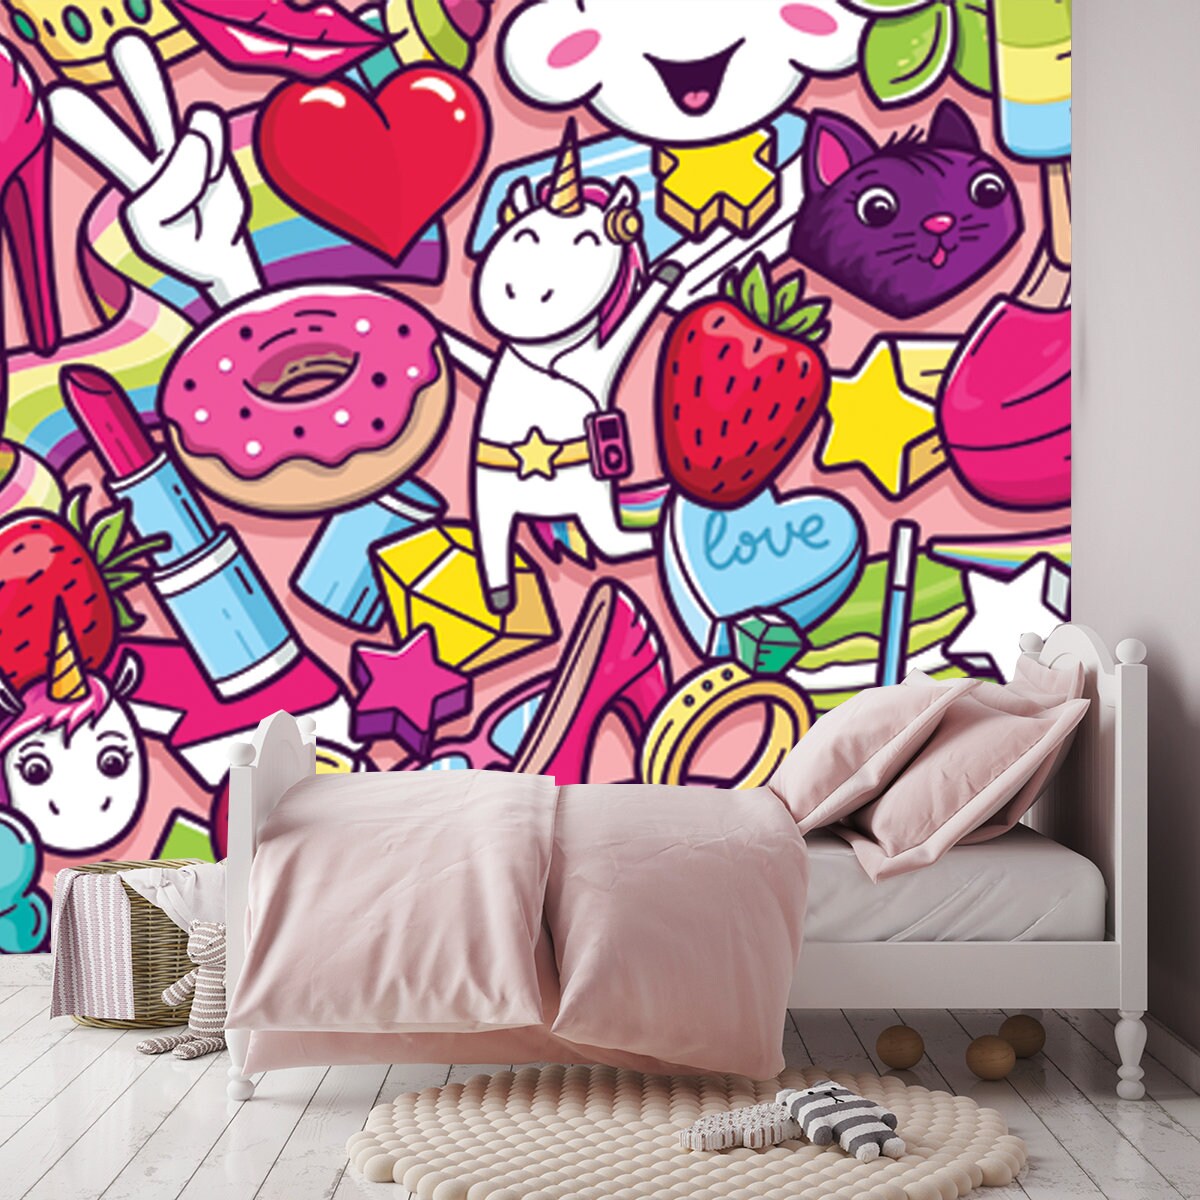 Graffiti Pattern with Girlish Style Doodles. Background with Childish Girl Power Crazy Elements Wallpaper Girls Bedroom Mural